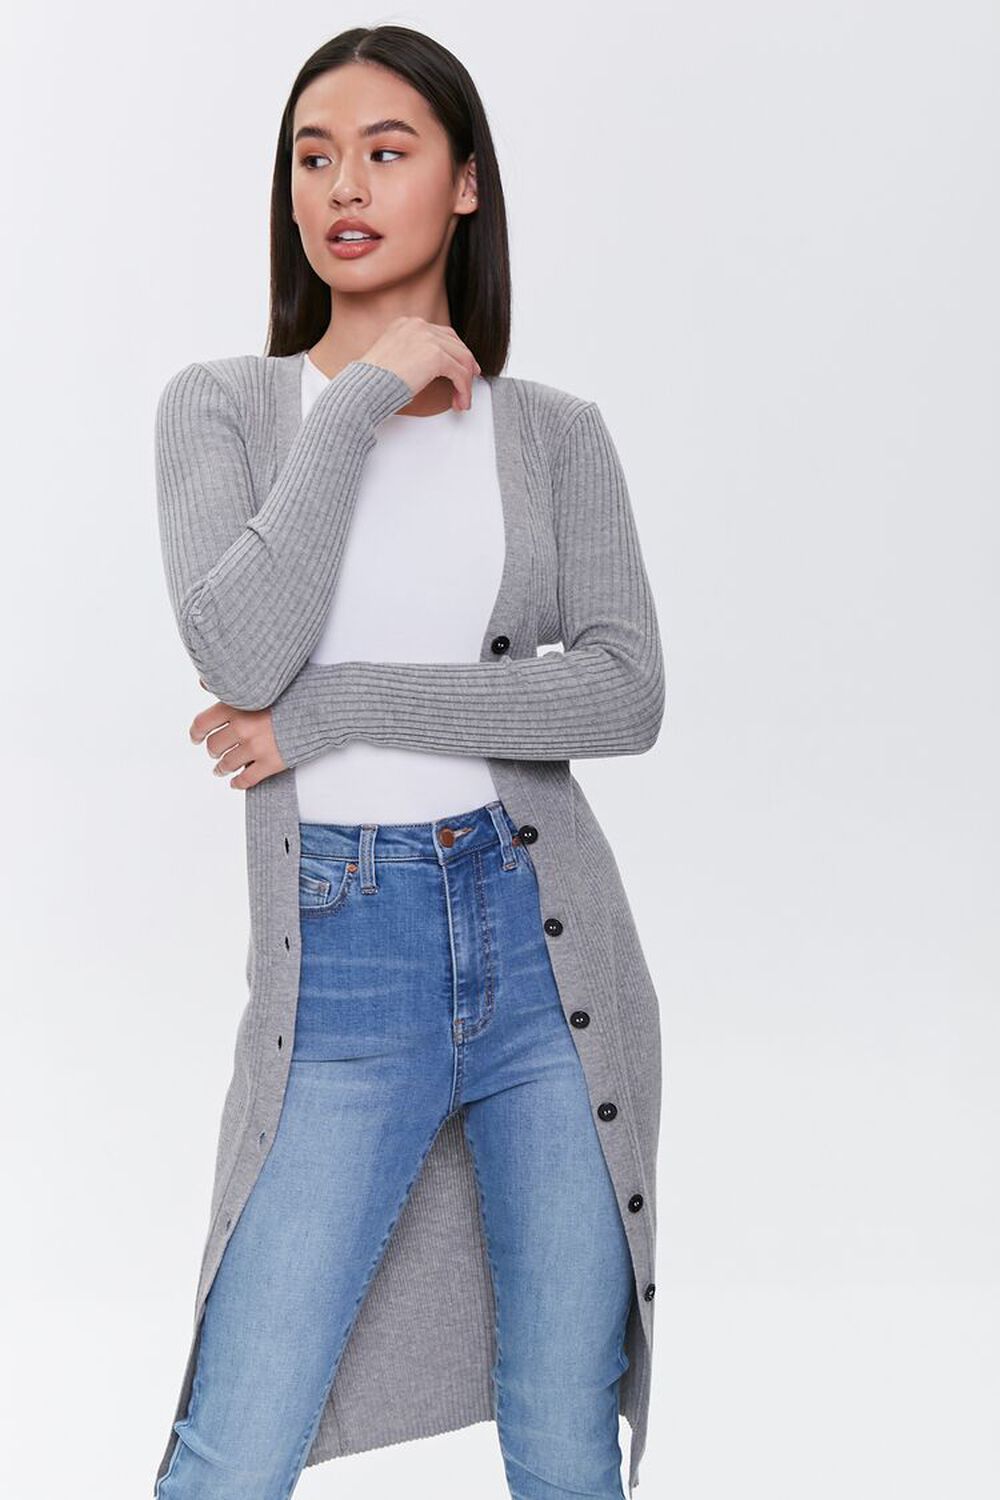 HEATHER GREY Buttoned Duster Cardigan, image 1